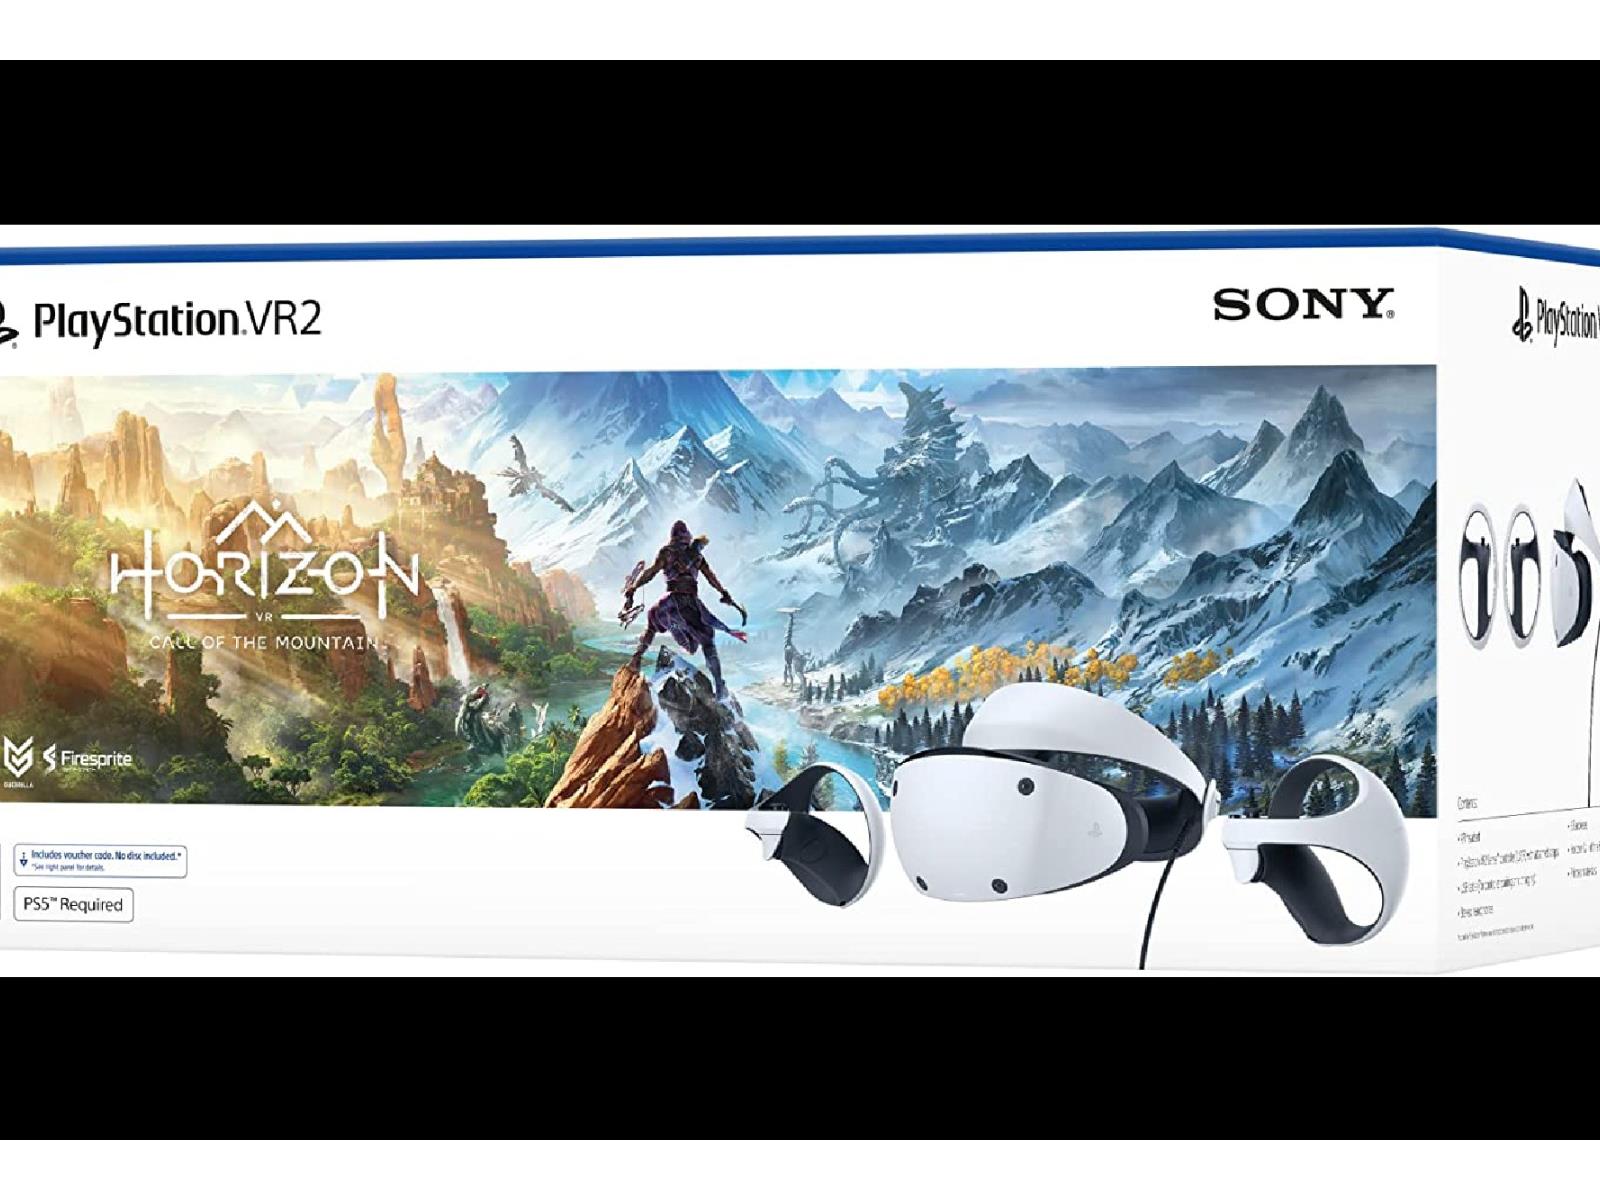 Sony PlayStation VR Launch Bundle ( 2 Games Included) Price in